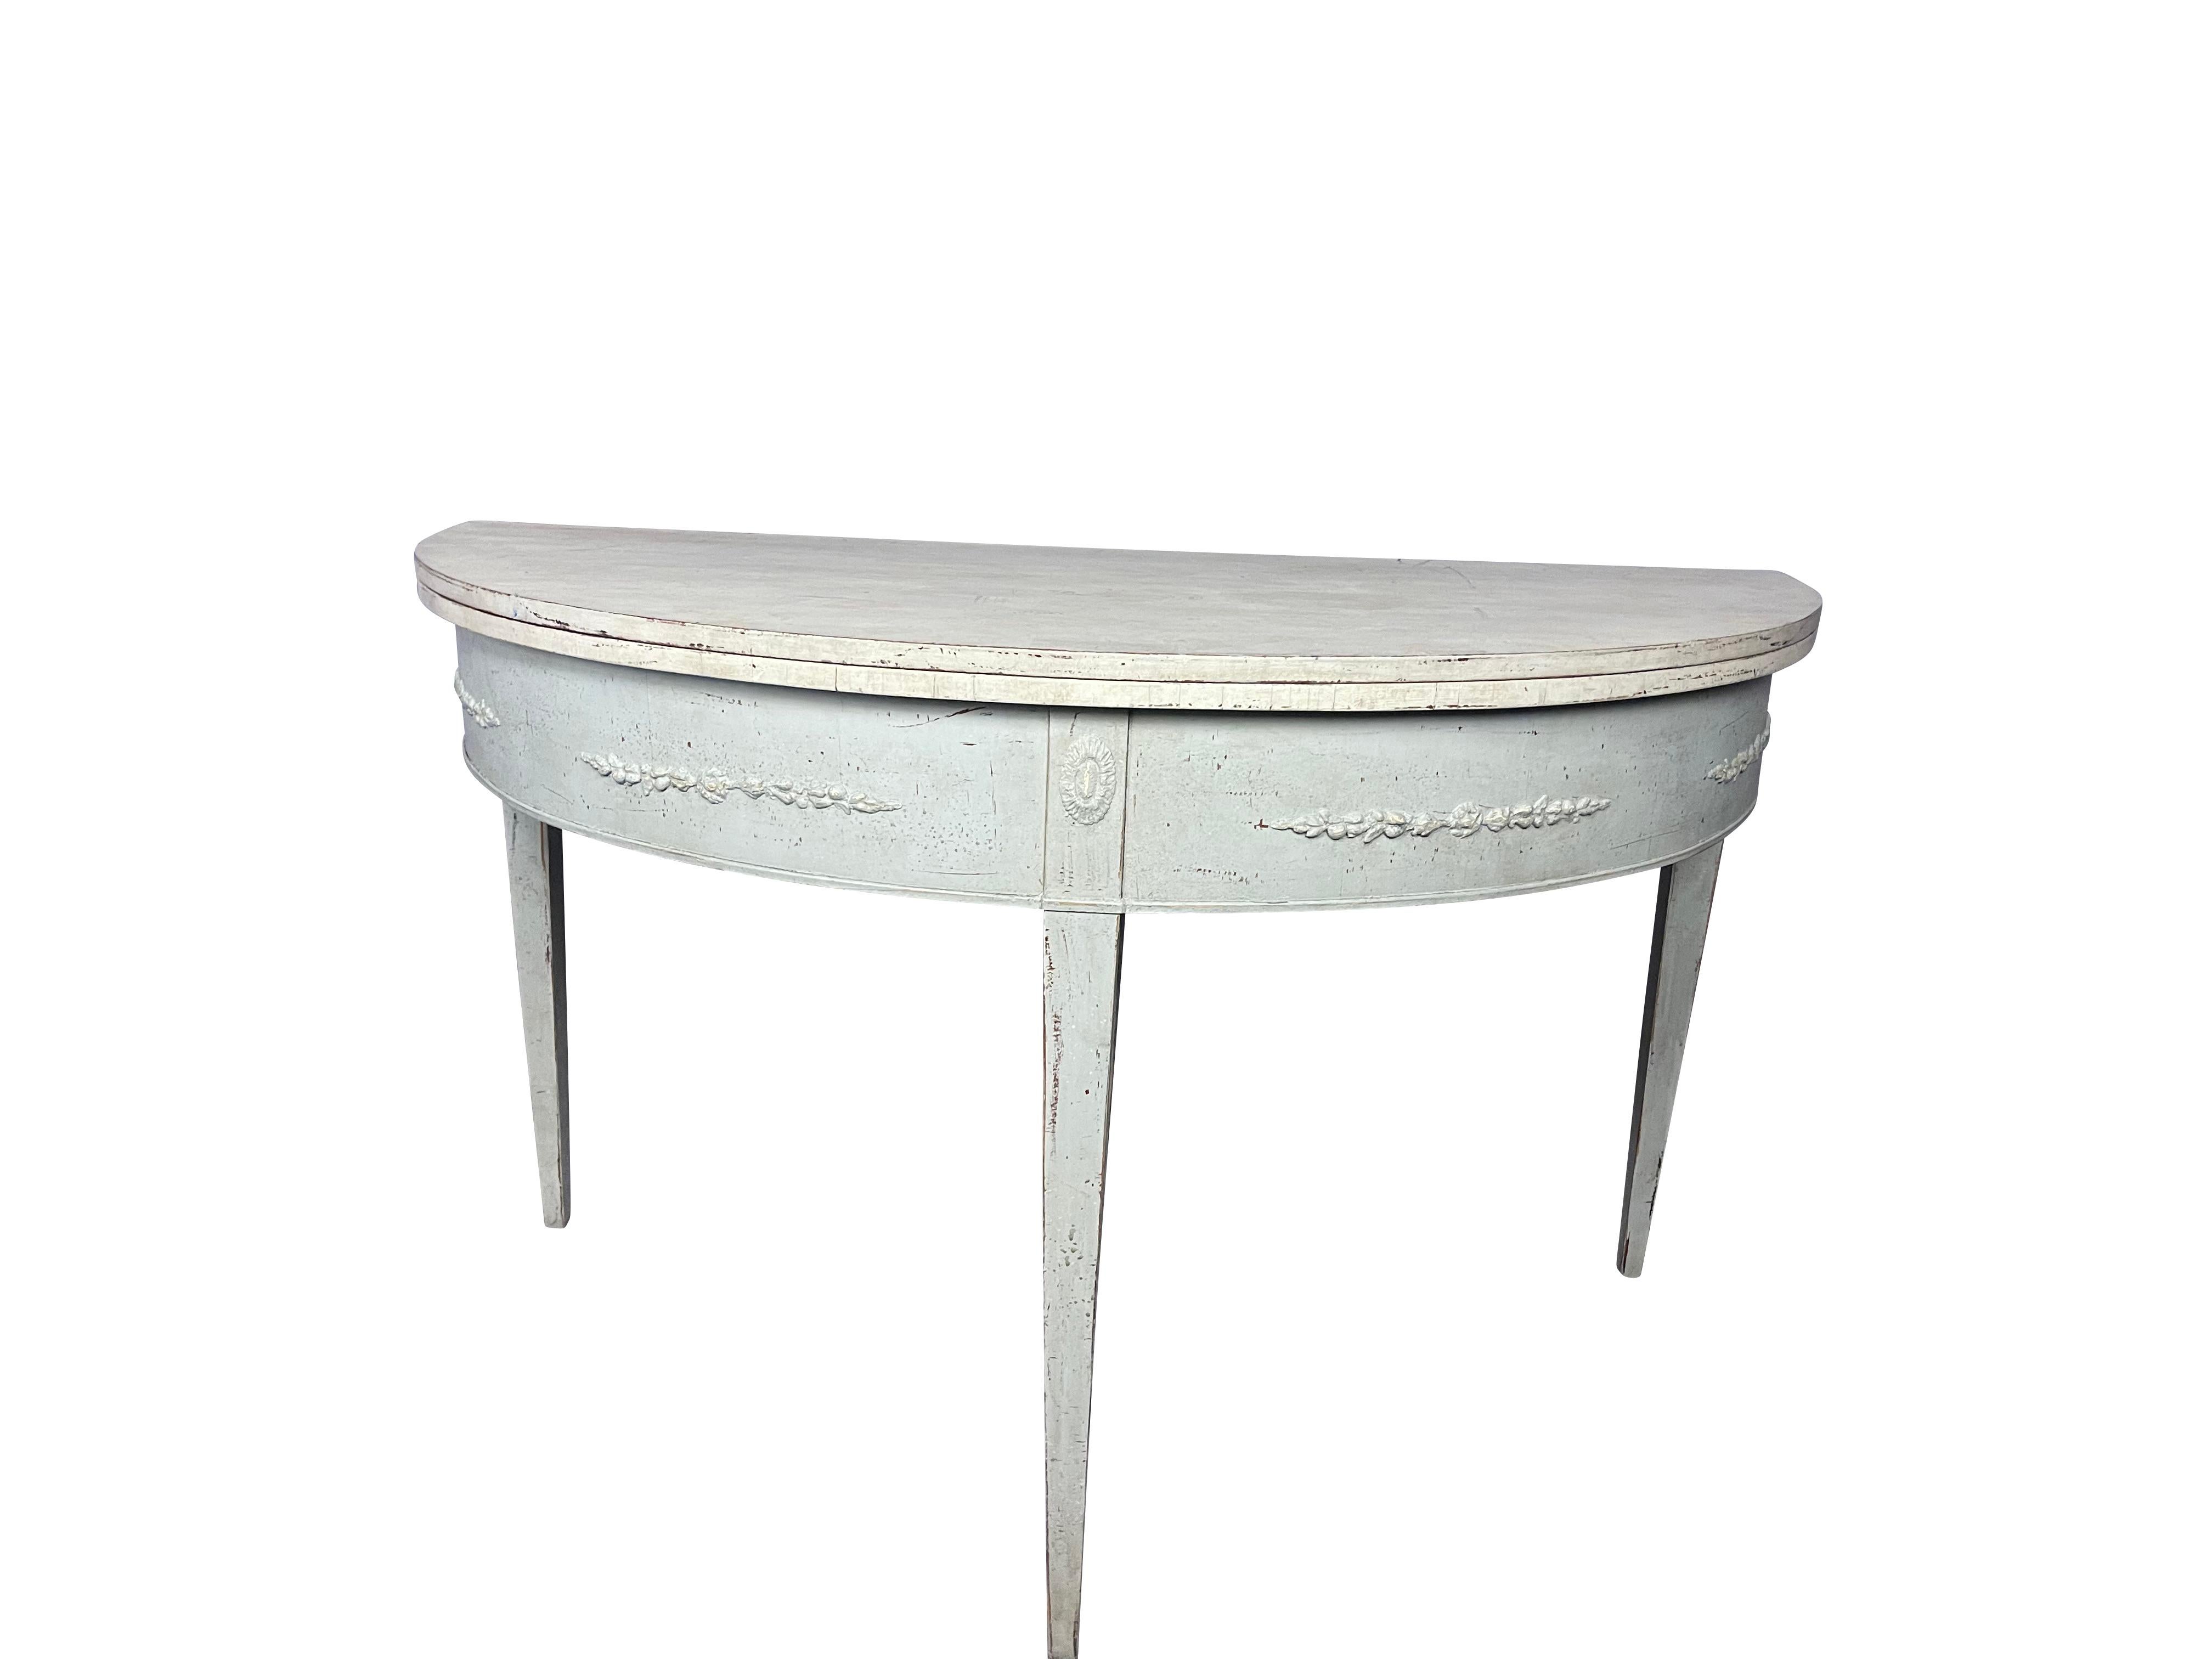 Gustavian Swedish Antique Painted Demilune/ Console Table Flip Top with Harlequin Design